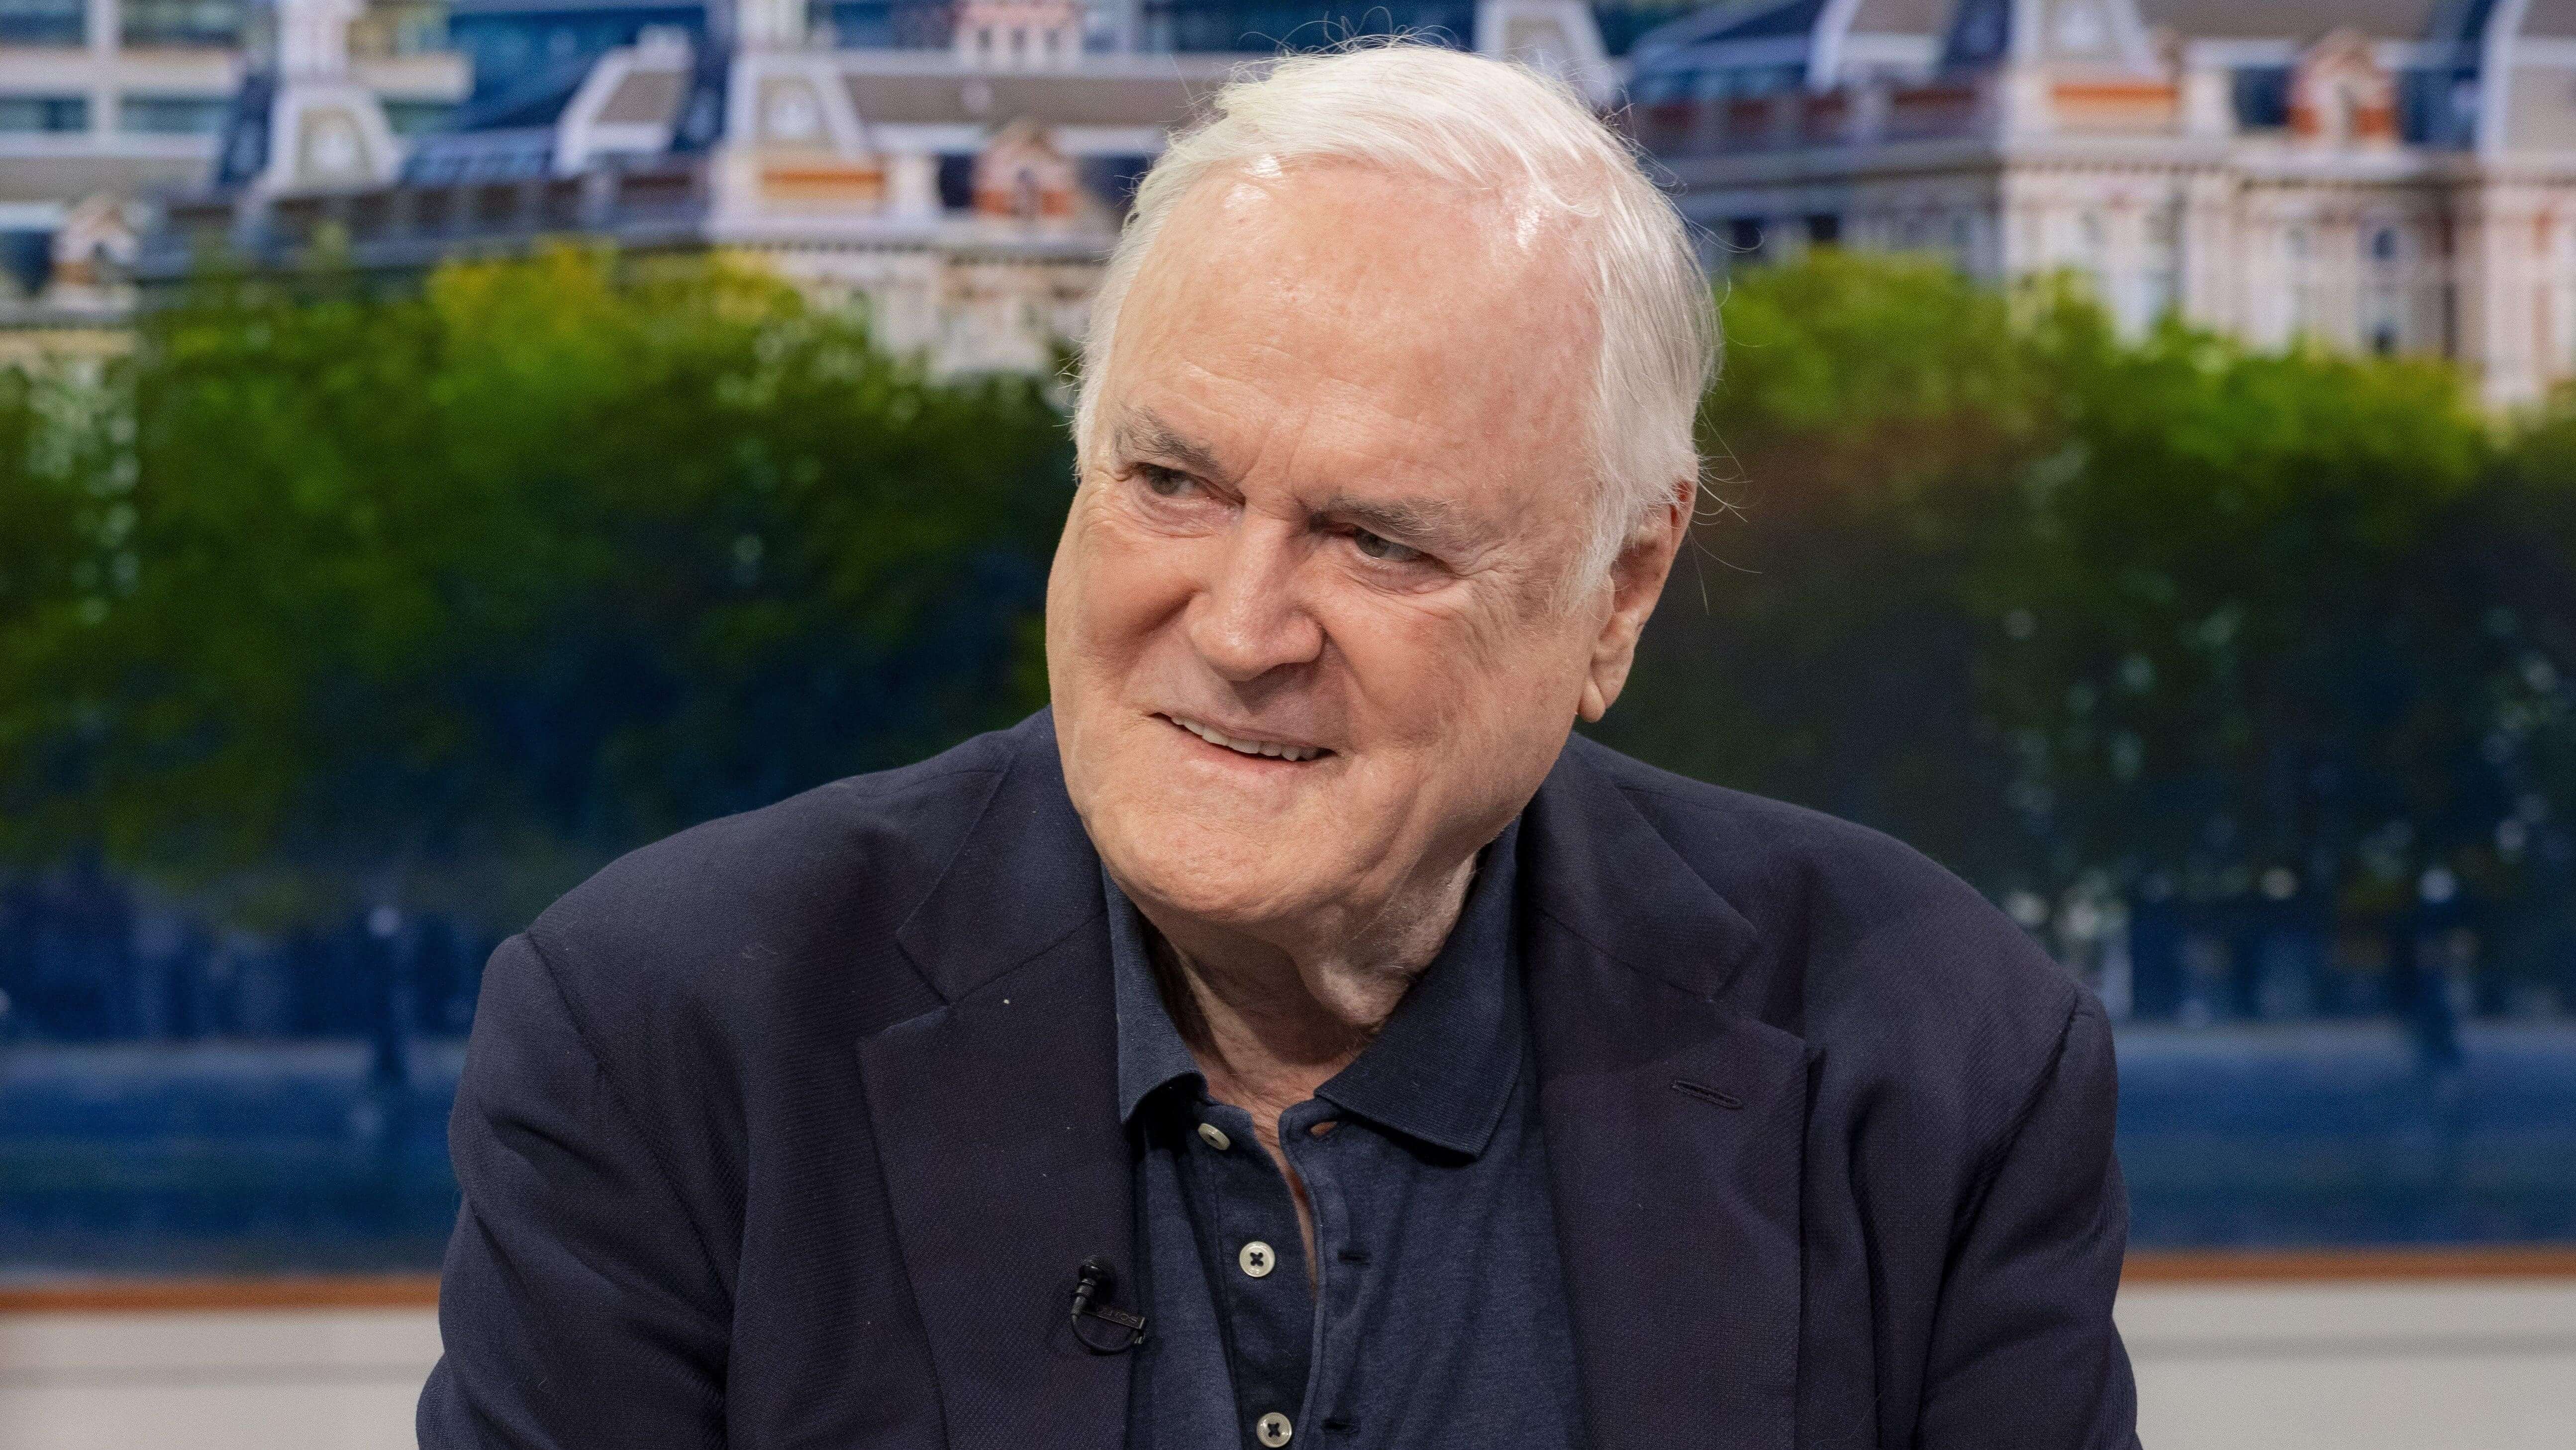 John Cleese’s cancel culture special is reportedly near-canceled